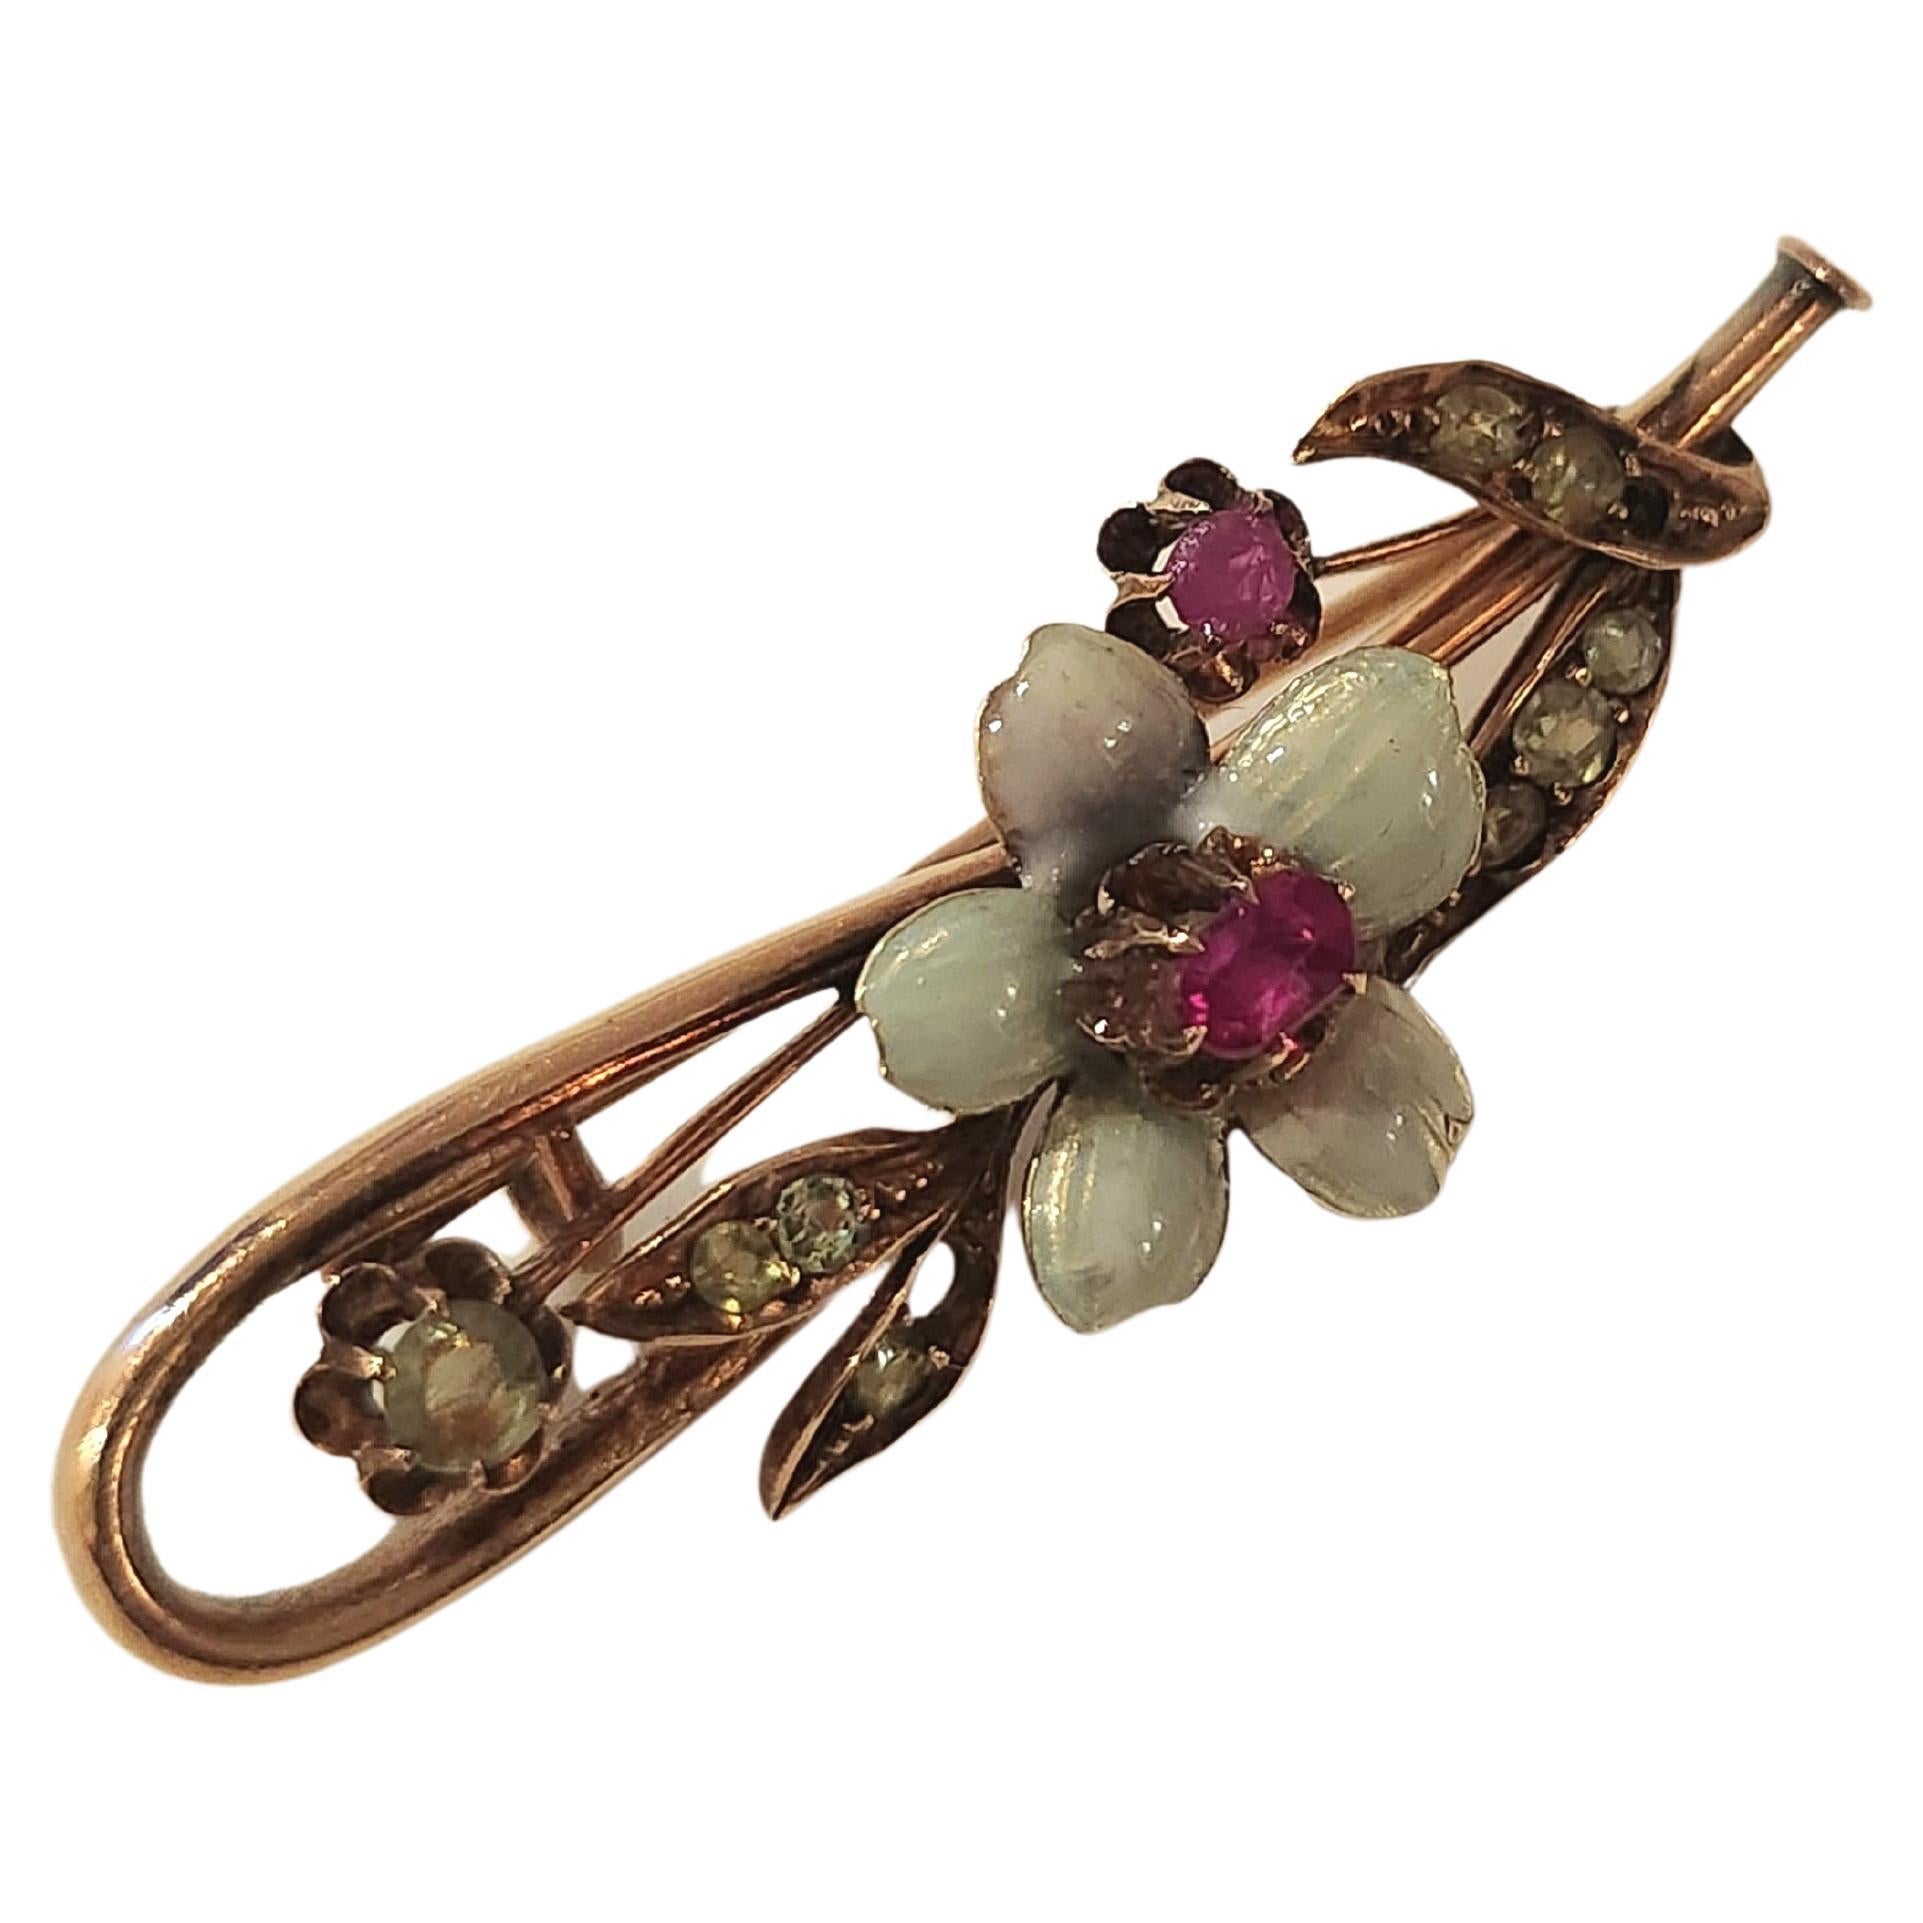 Antique imperial russian era brooch with demantoid and ruby decorted with an enamel flower brooch was made in moscow 1907.c during the imperial russian era hall marked 56 imperial russian gold standard and moscow assay mark total lenght 4.2cm 